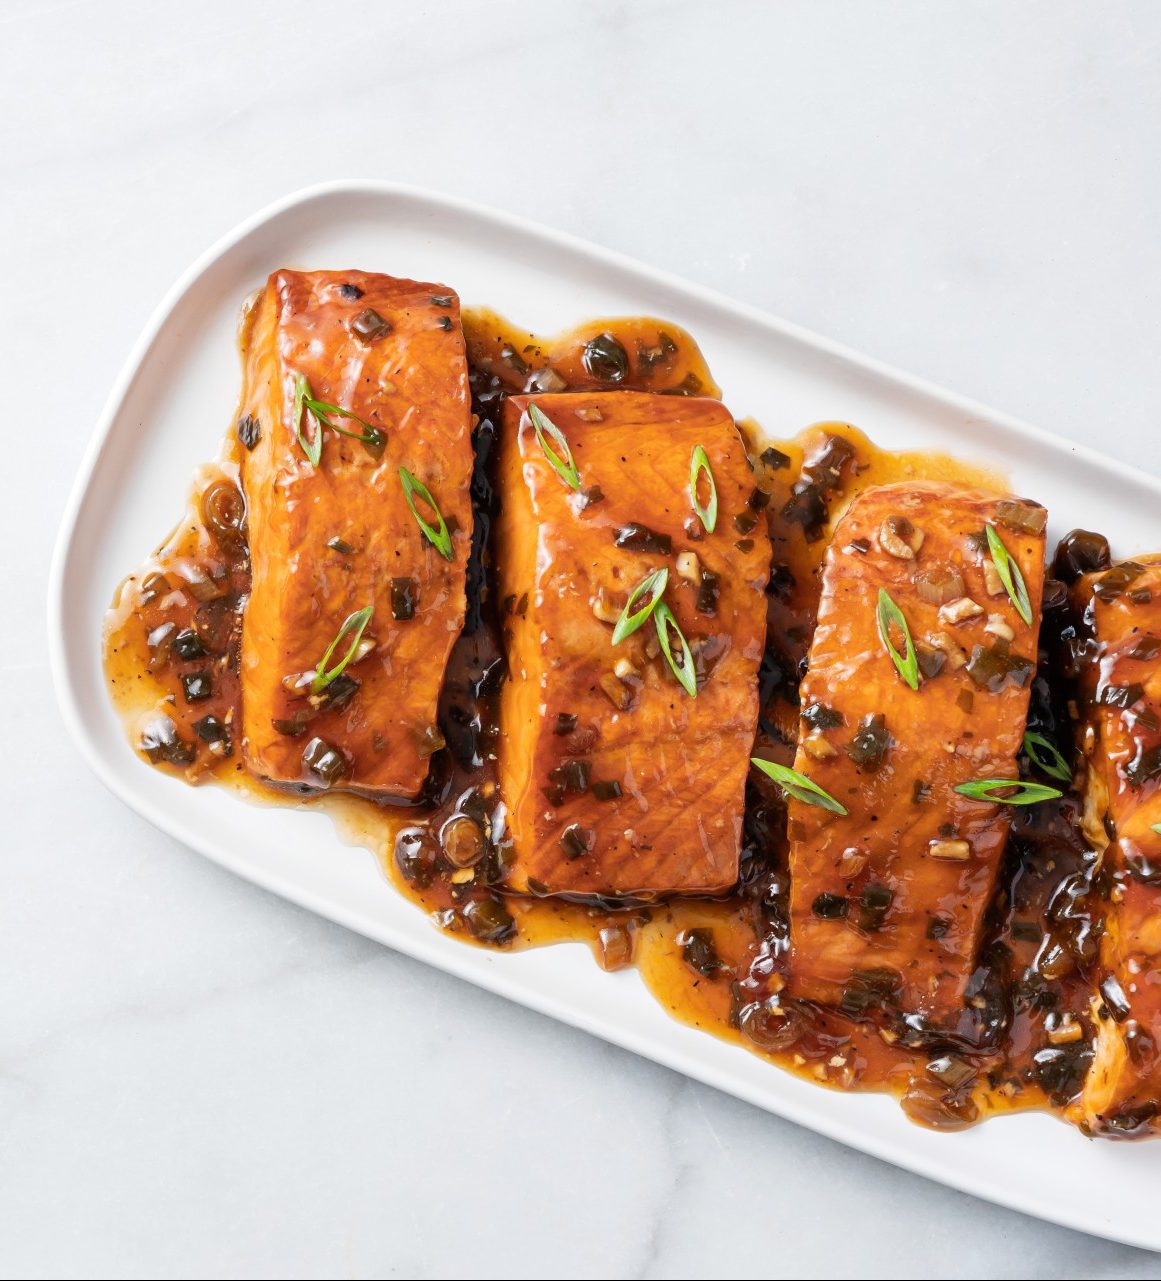 Honey soy salmon topped with chives